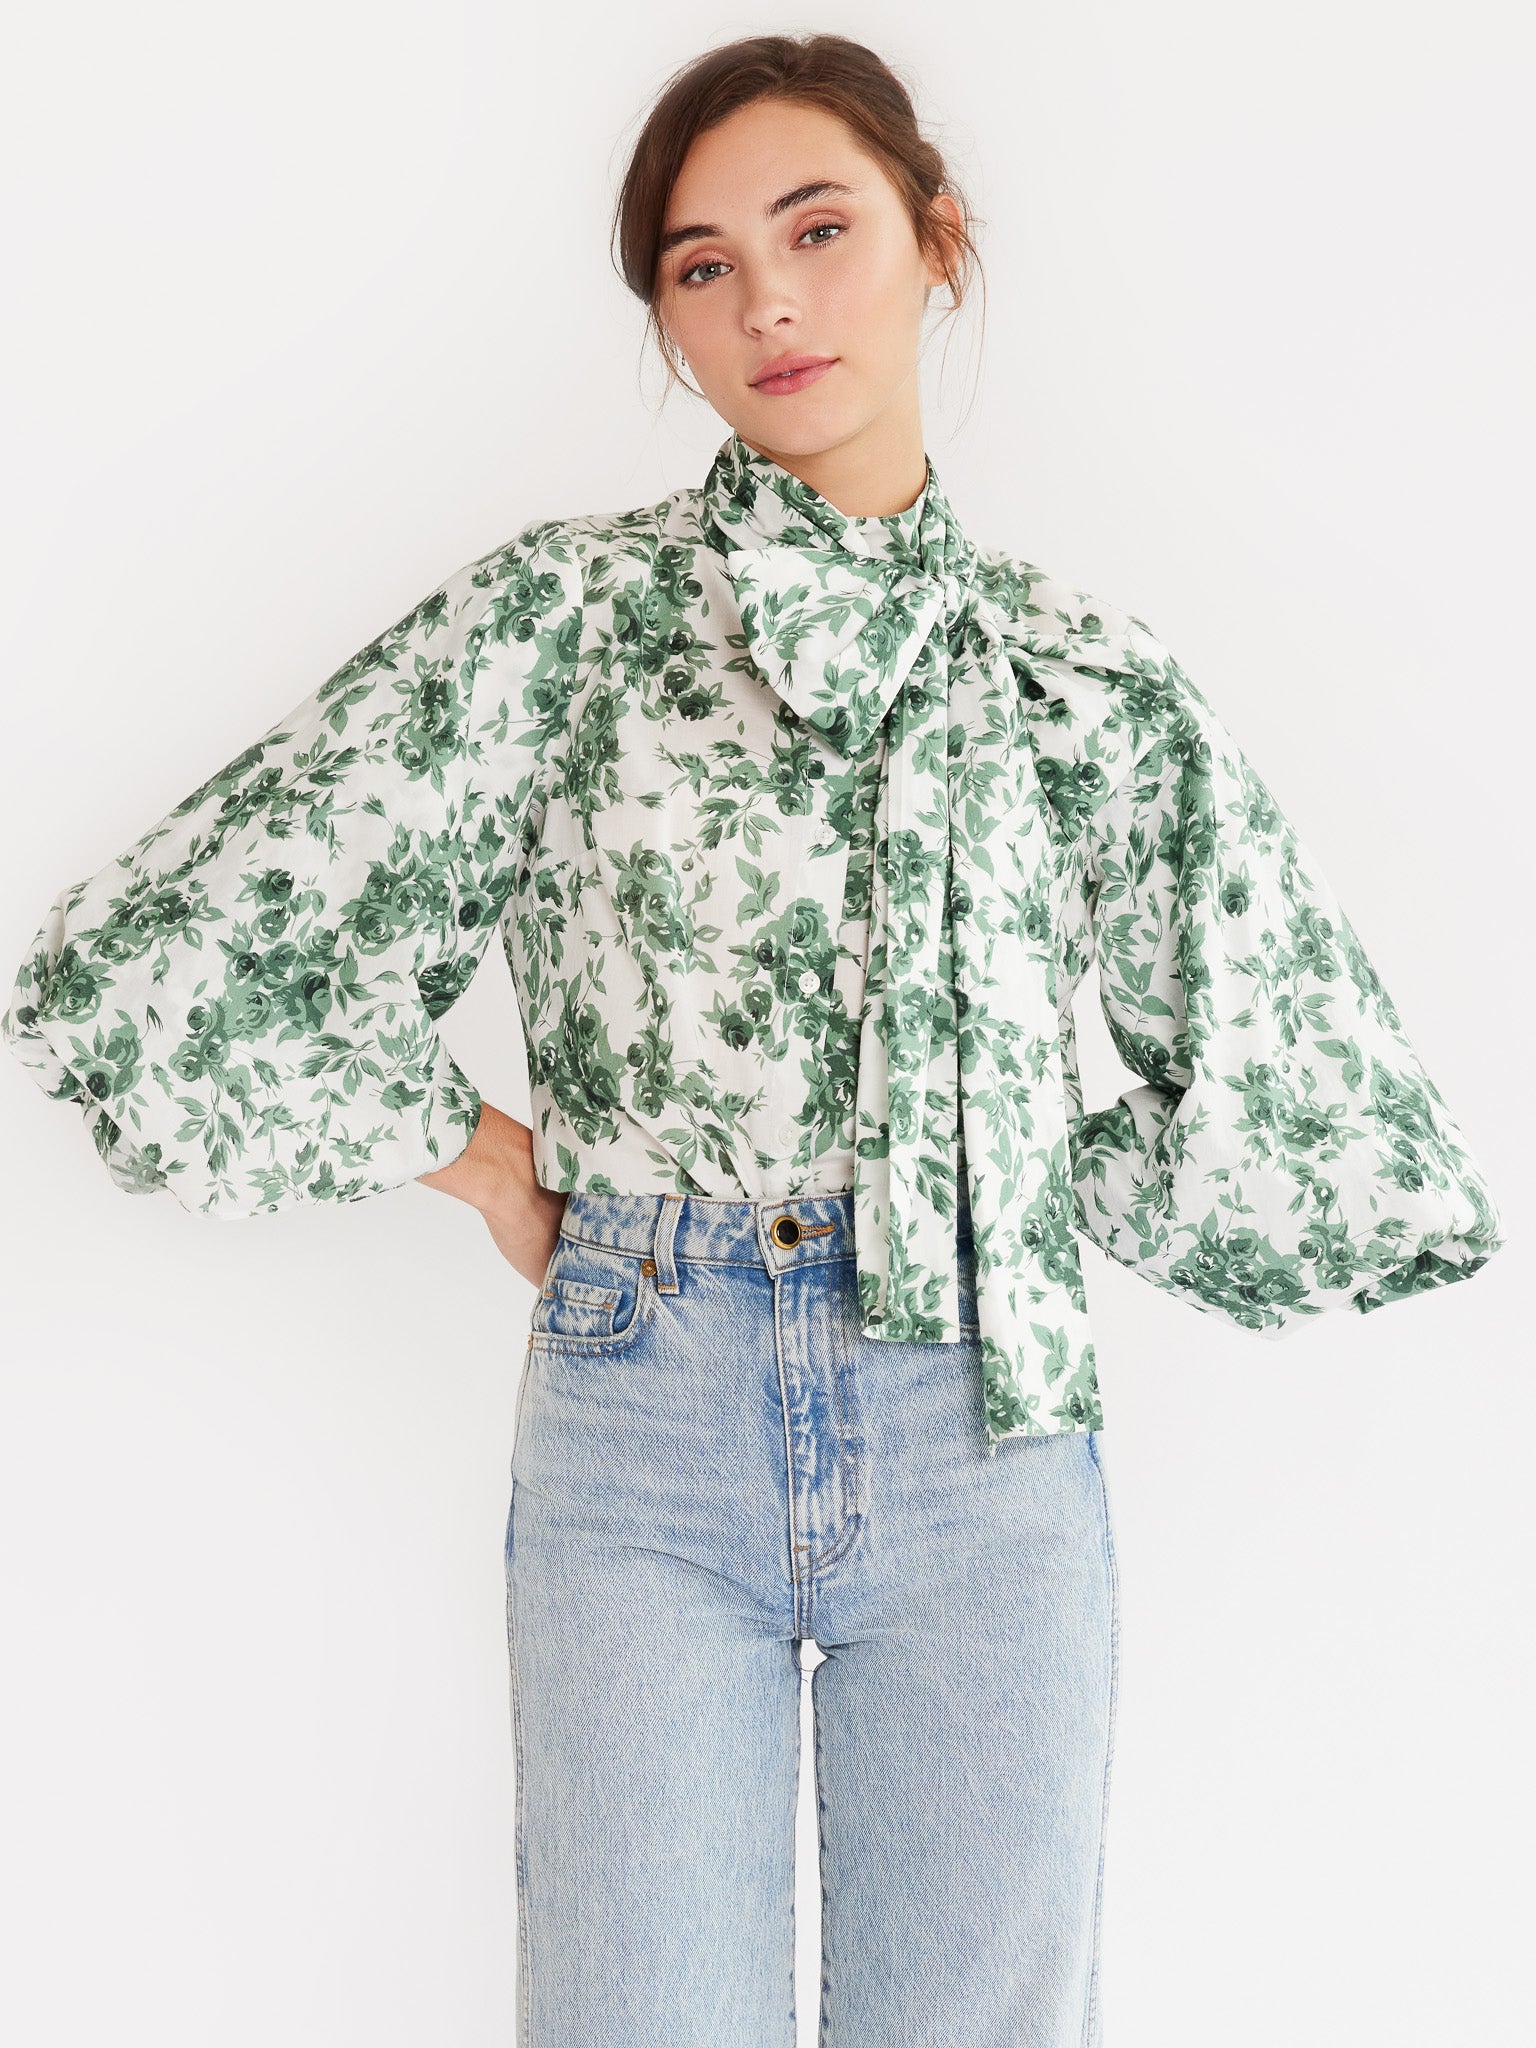 mille-clothing-gigi-top-in-green-bouquet-29973316894807